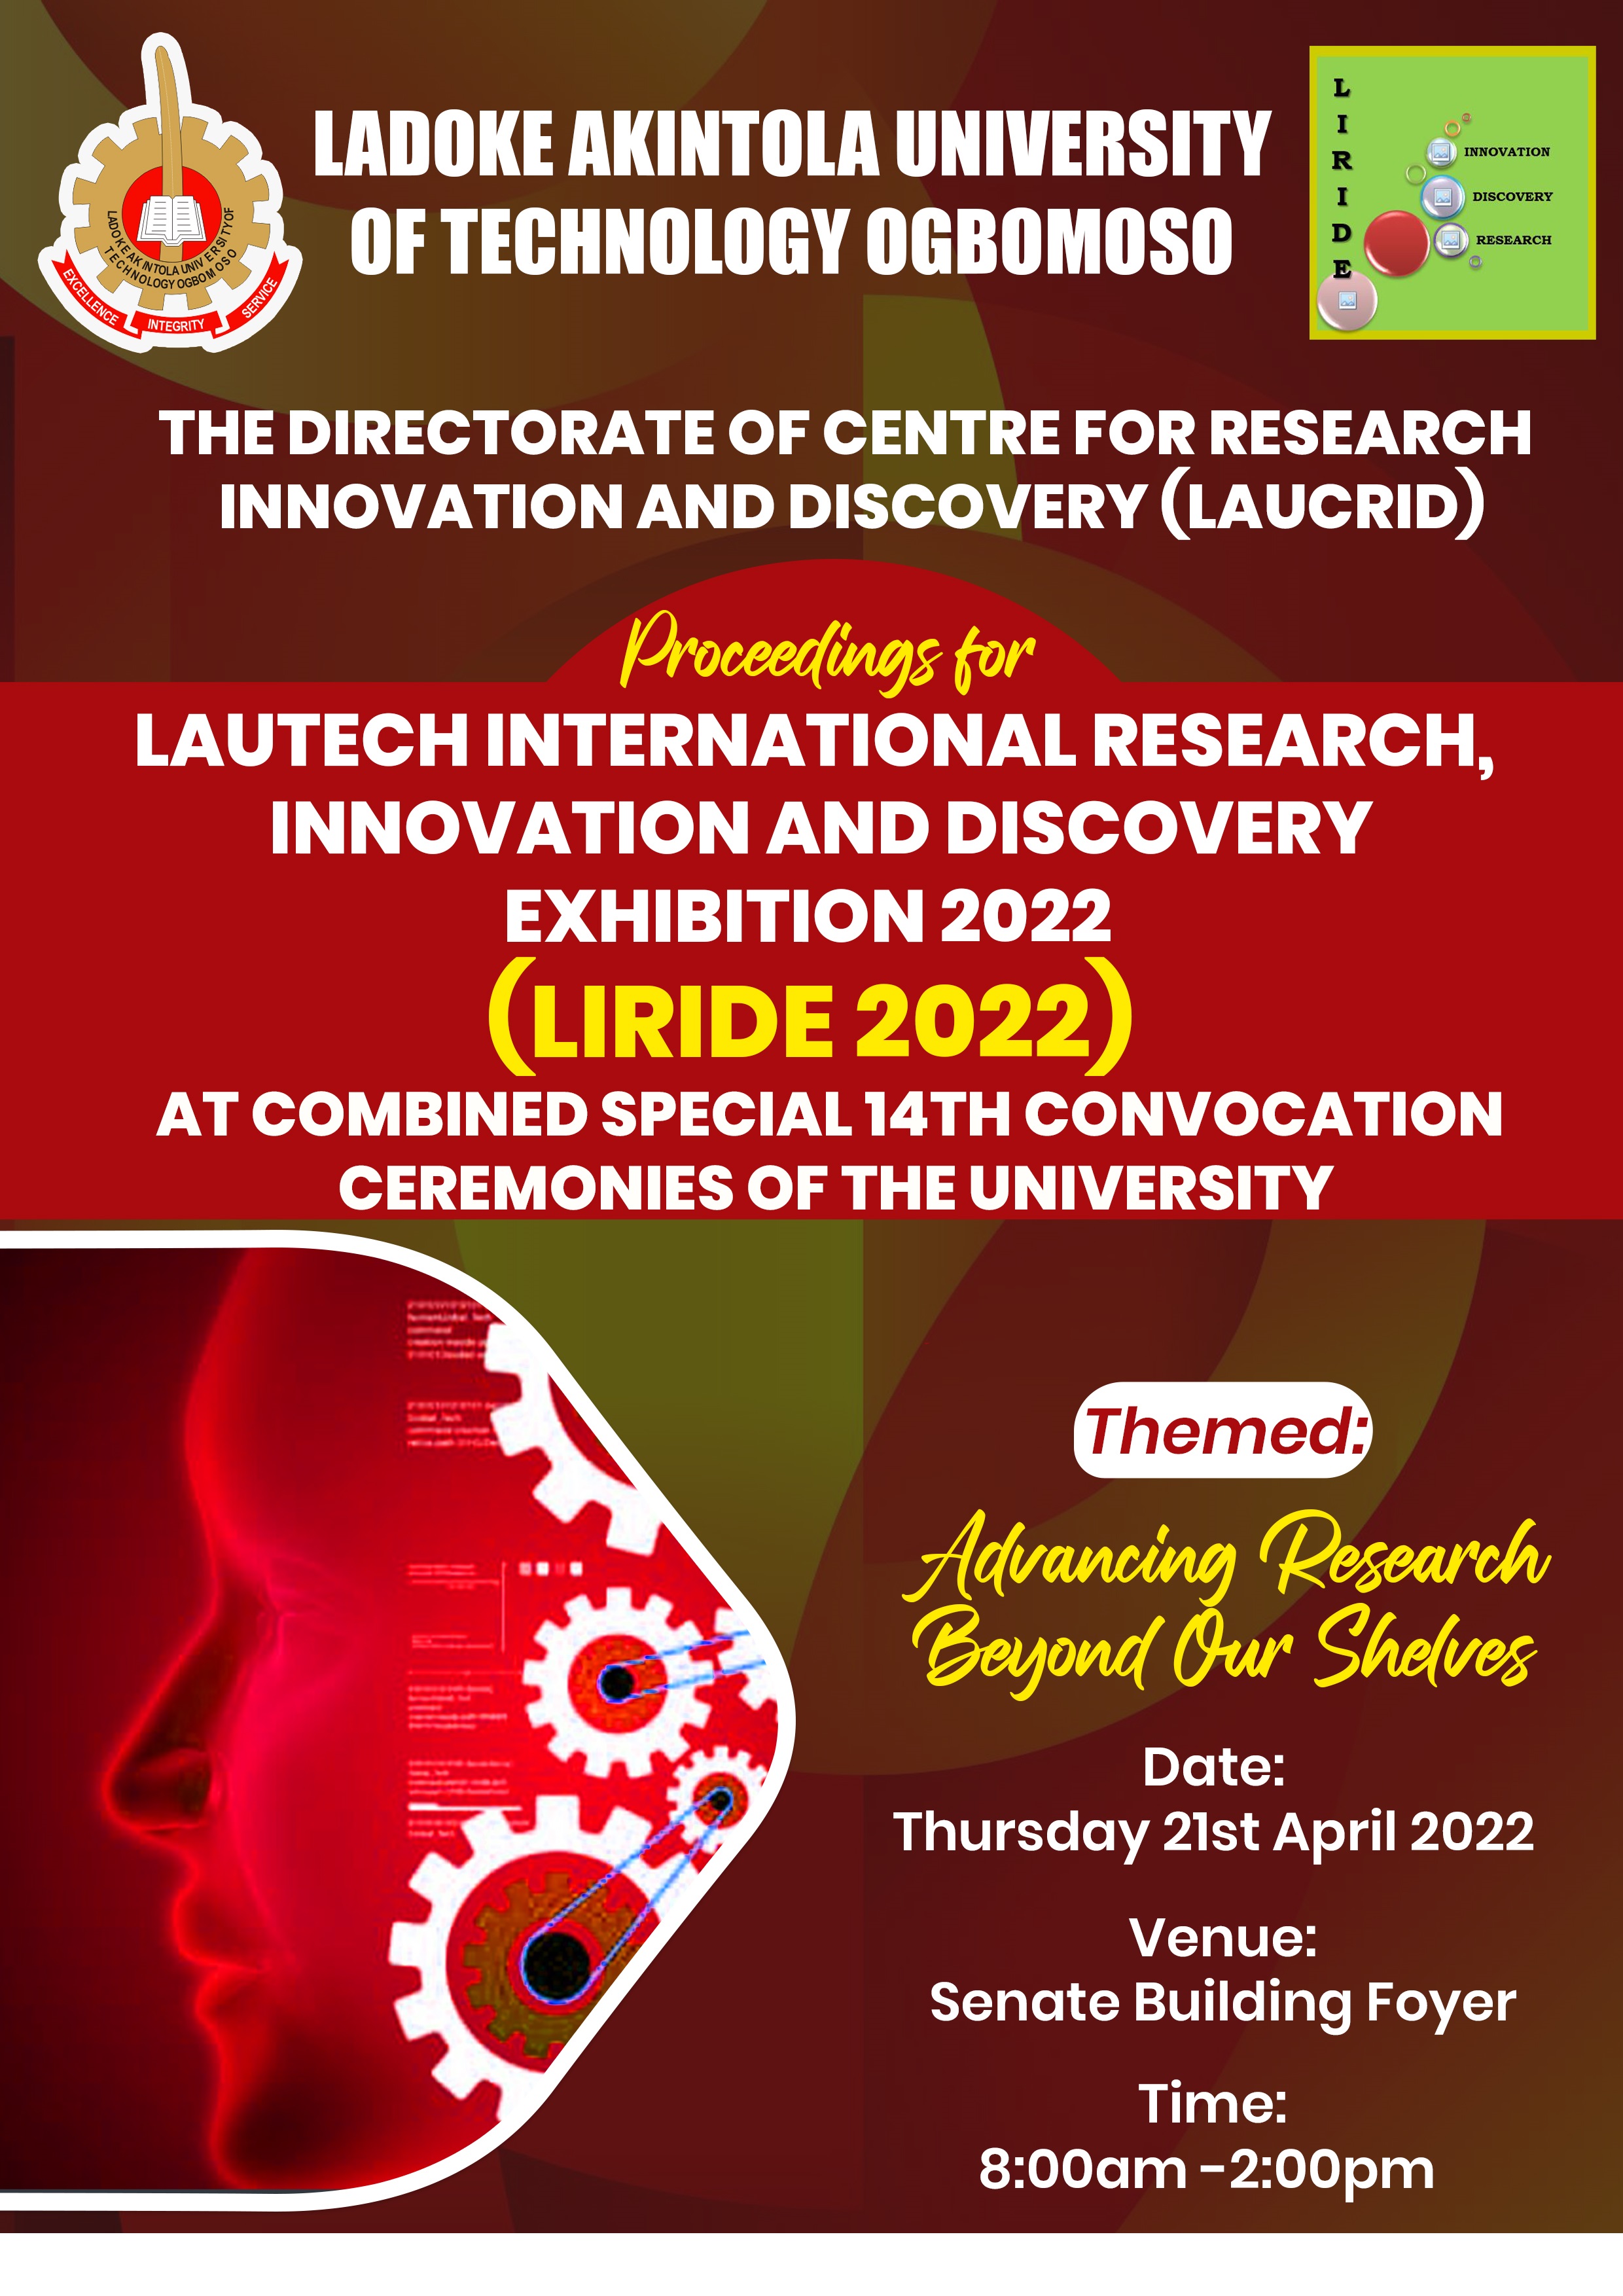 LAUTECH INTERNATIONAL RESEARCH, INNOVATION AND DISCOVERY EXHIBITION 2022 (LIRIDE 2022)